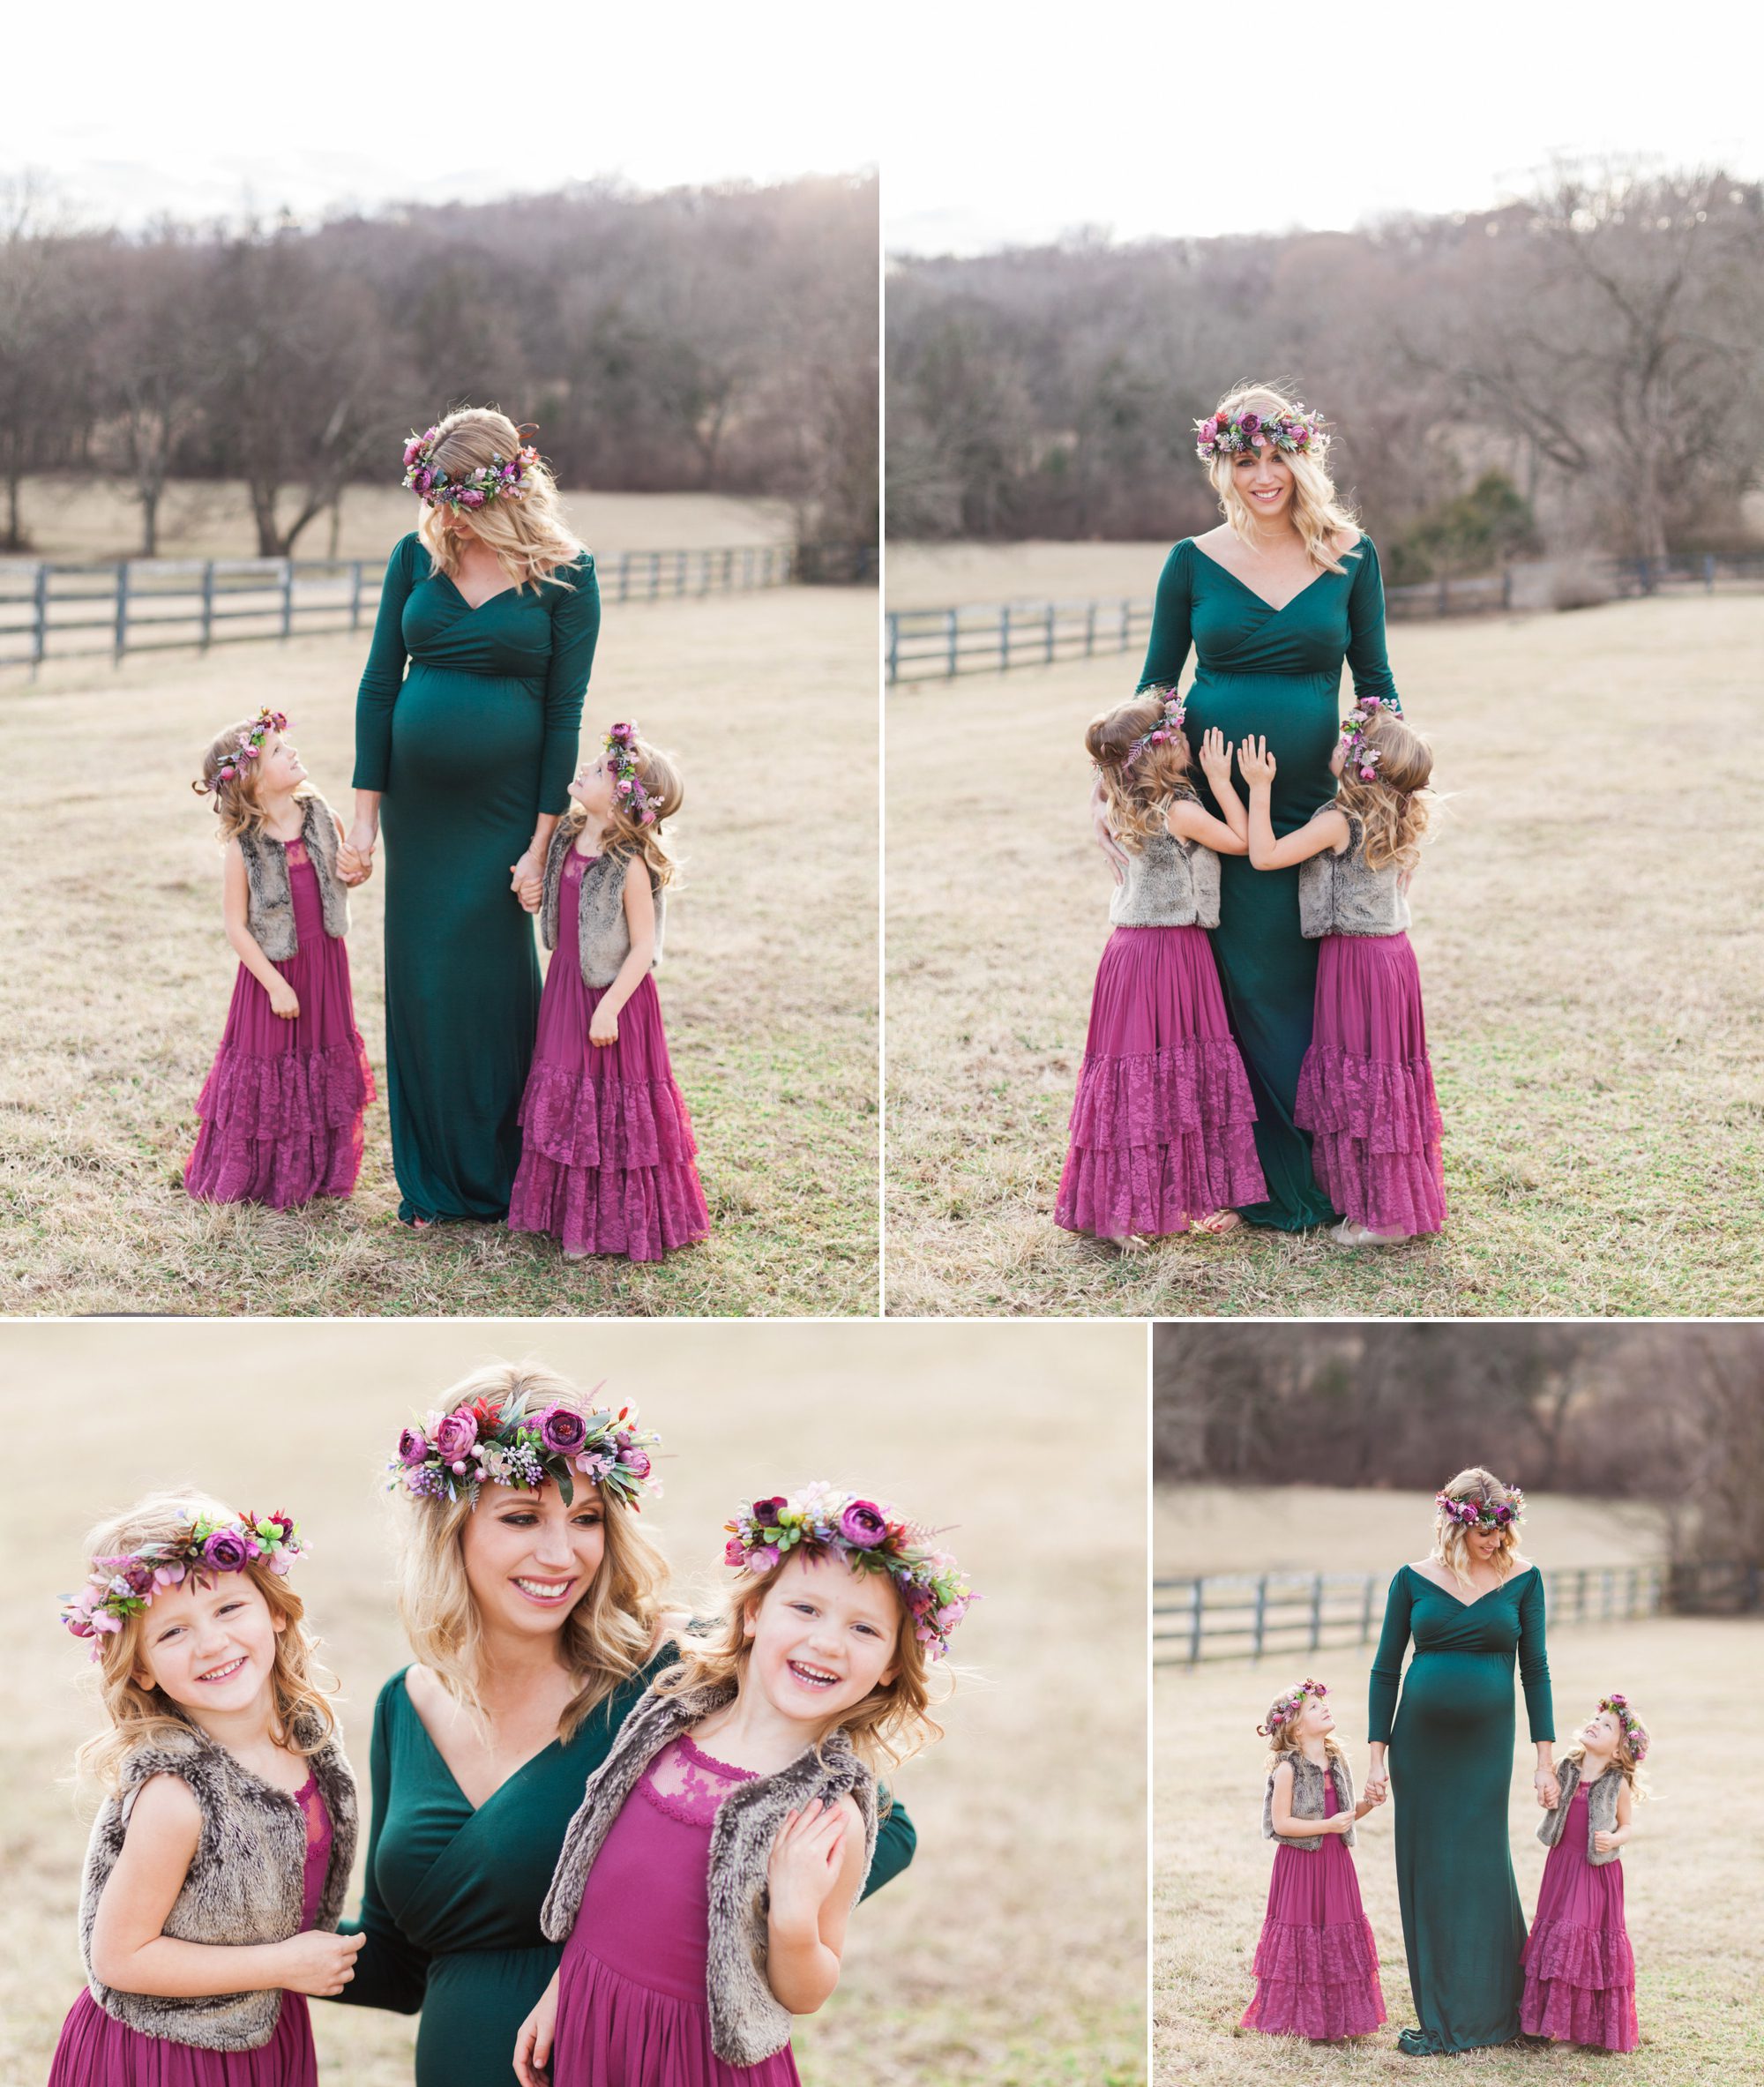 Mom with Daughters in field. Winter Family Maternity Photo Session in Brentwood, TN. Photo by Krista Lee Photography Nashville TN